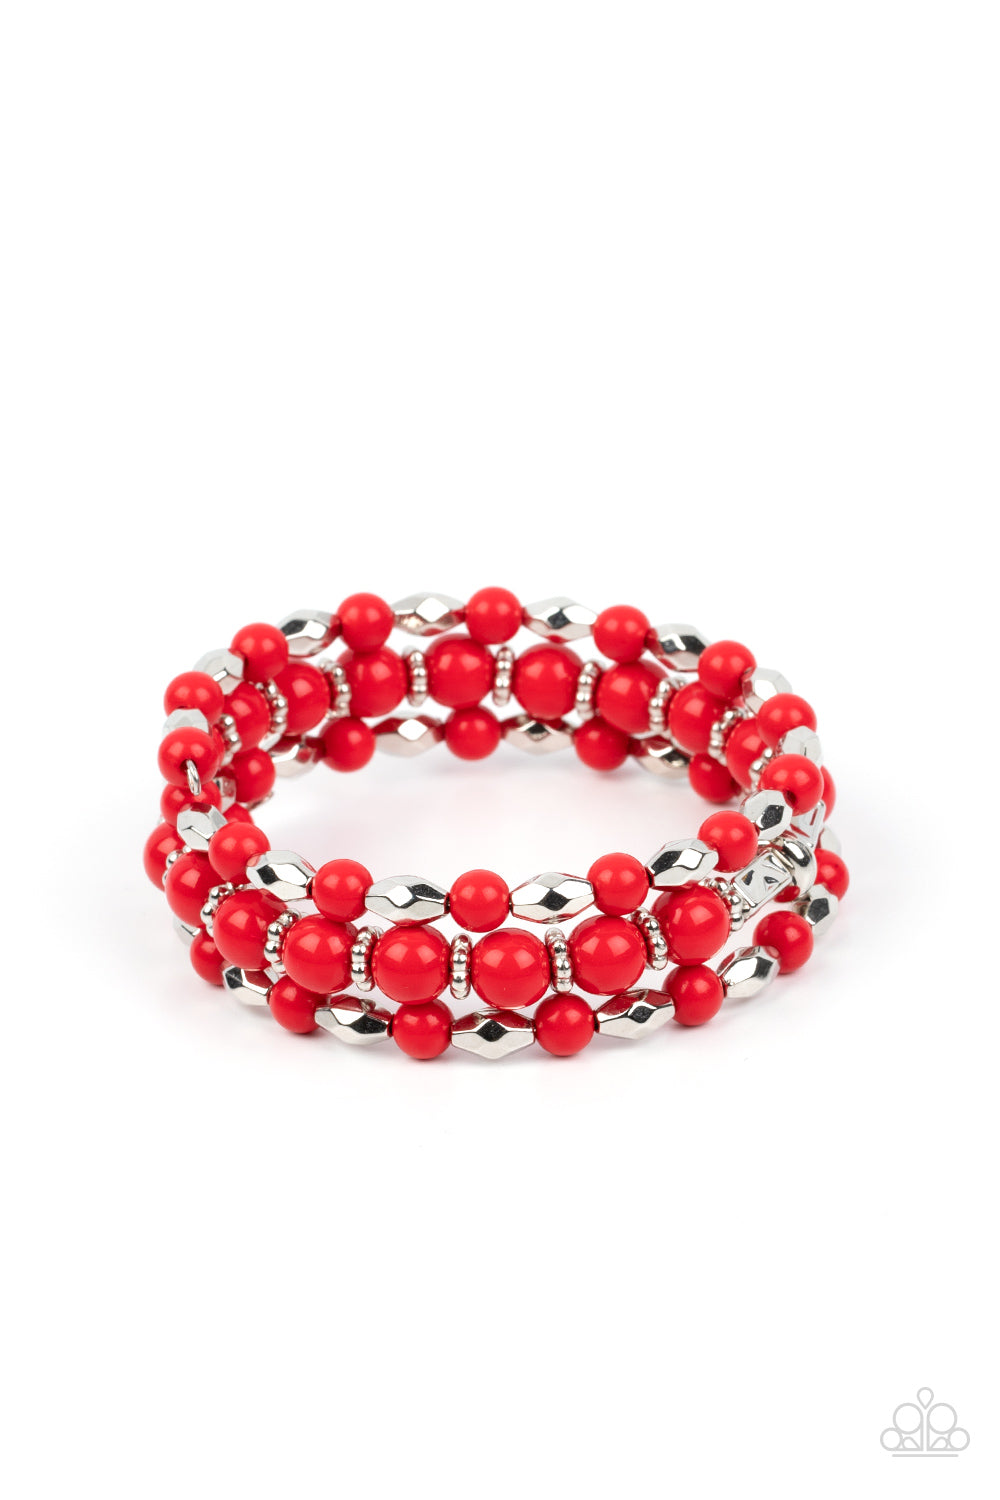 Colorfully Coiled - Red and Silver Coil Bracelet - Paparazzi Accessories - A mismatched collection of faceted silver beads, studded silver rings, and fiery red beads are threaded along a wire that coils around the wrist, creating a colorful infinity wrap style bracelet. Sold as one individual bracelet.